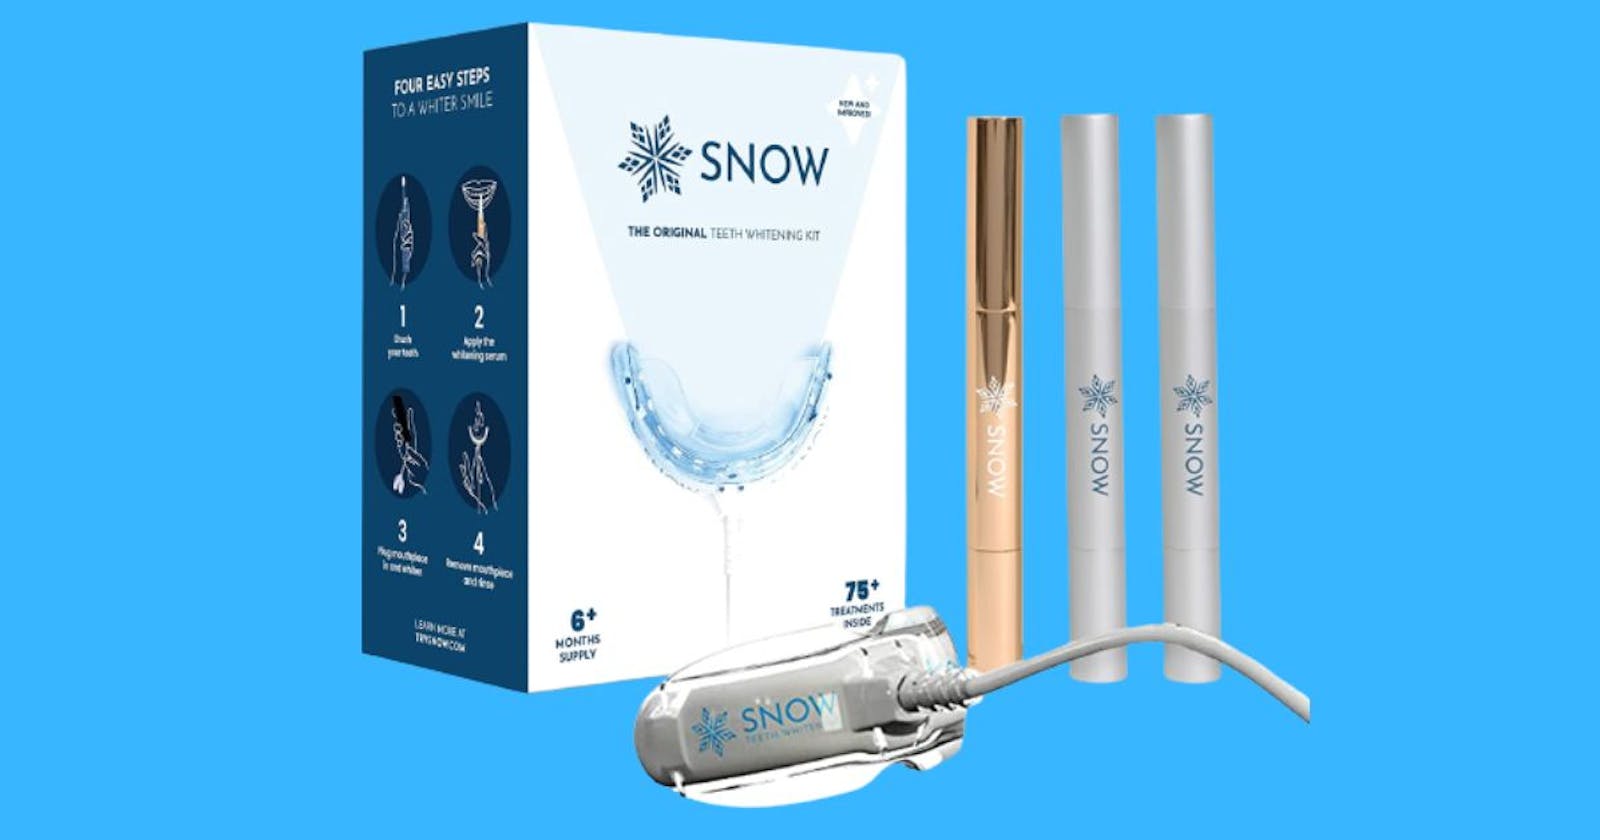 Snow Teeth Whitening Review: Are You Being Scammed?